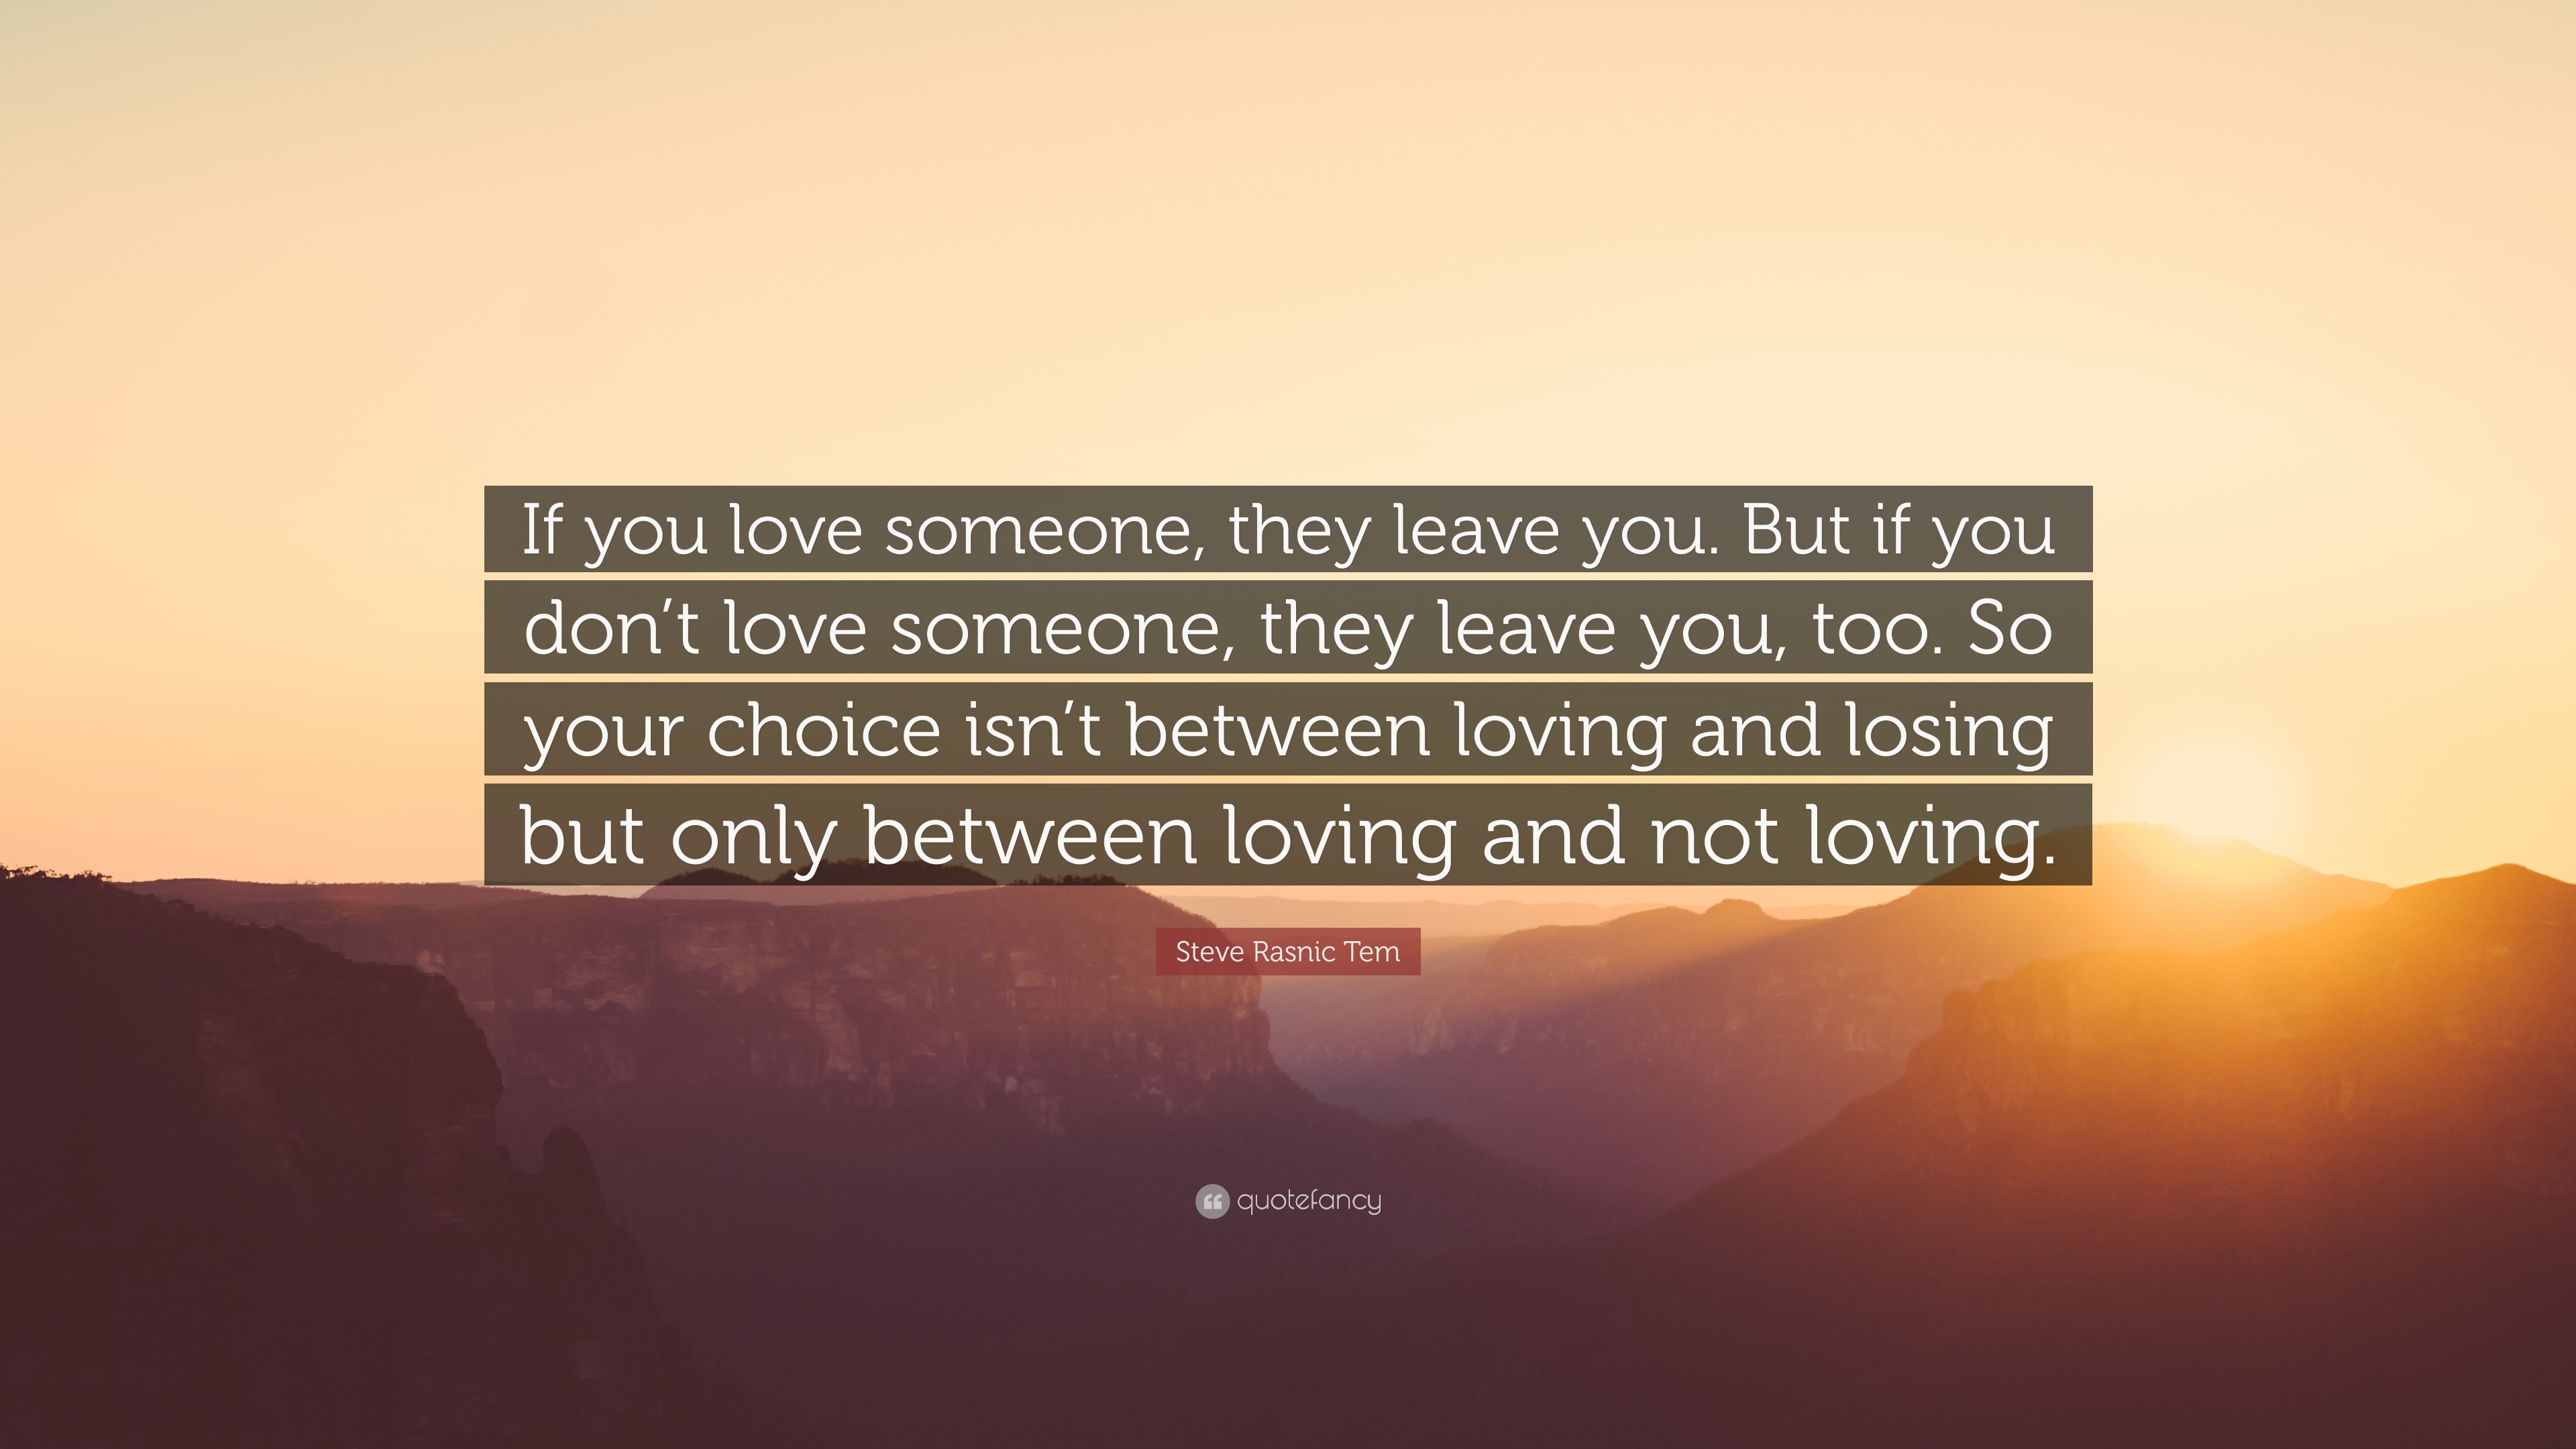 Steve Rasnic Tem Quote “If you love someone they leave you But